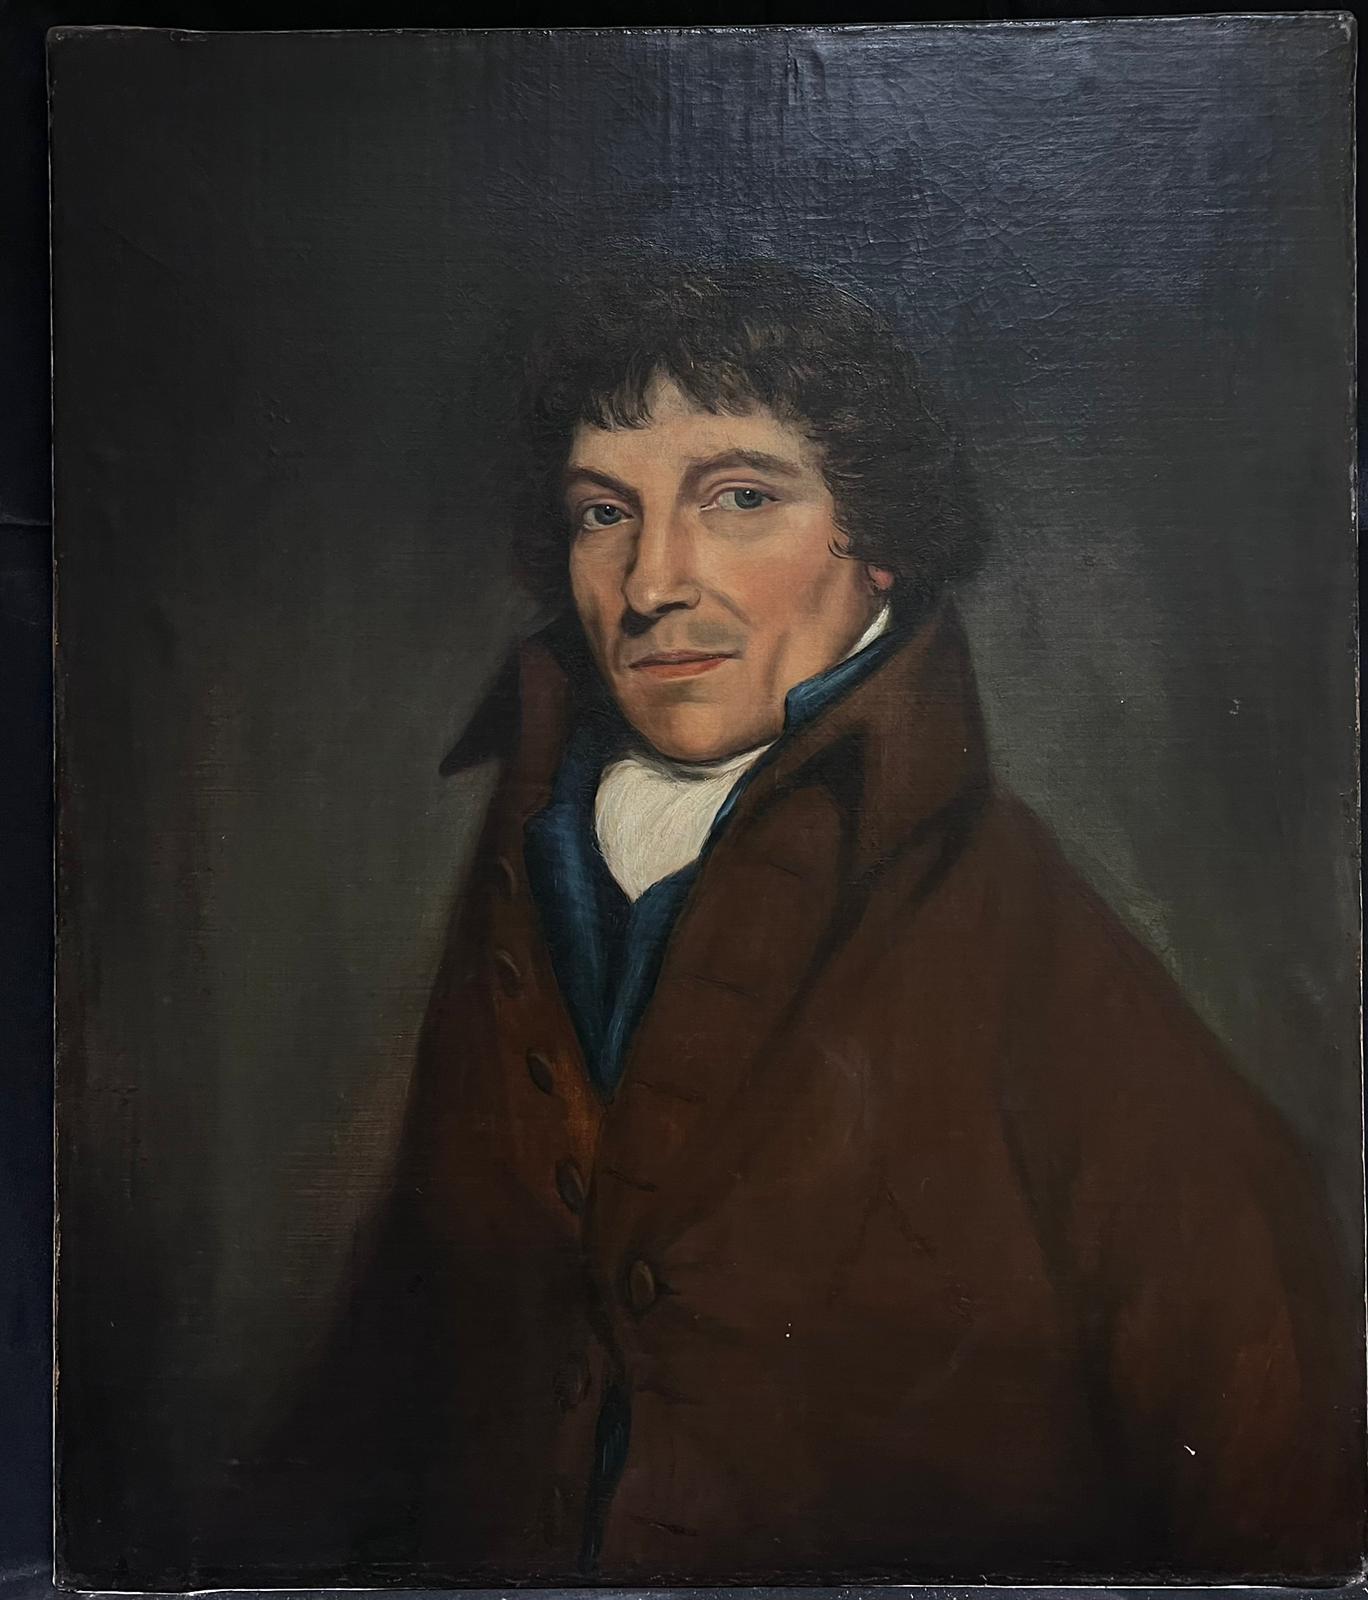 Suffolk School, early 19th century
Portrait of a Country Gentleman
oil on canvas, unframed
canvas: 30 x 25 inches
provenance: private collection, Suffolk
condition: very good and sound condition 